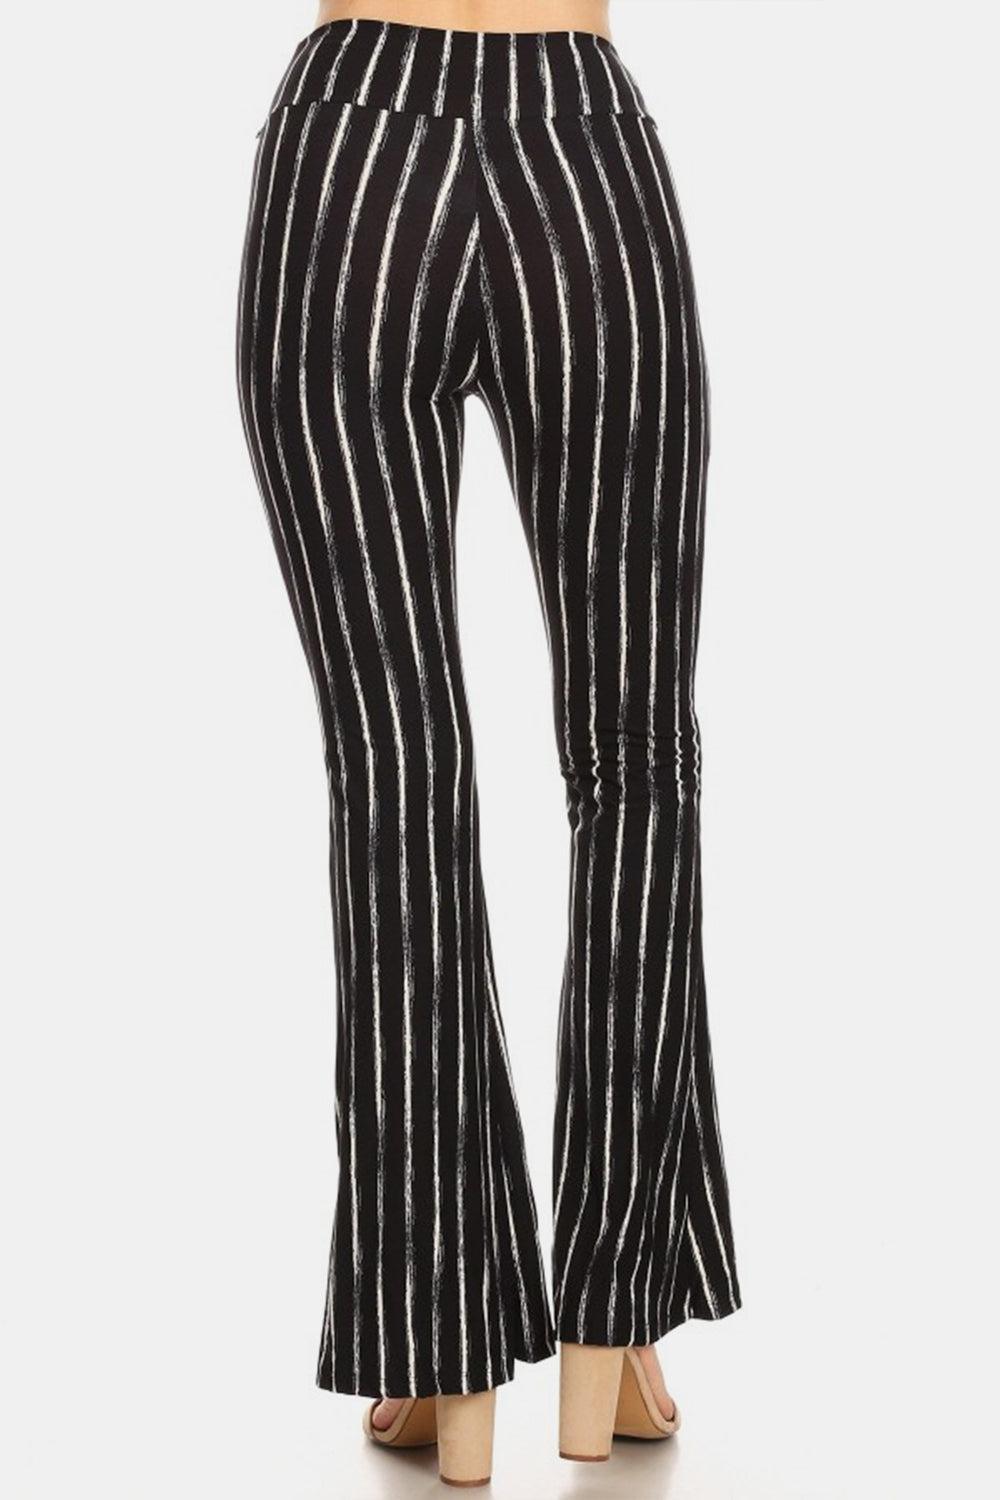 a woman wearing black and white striped pants